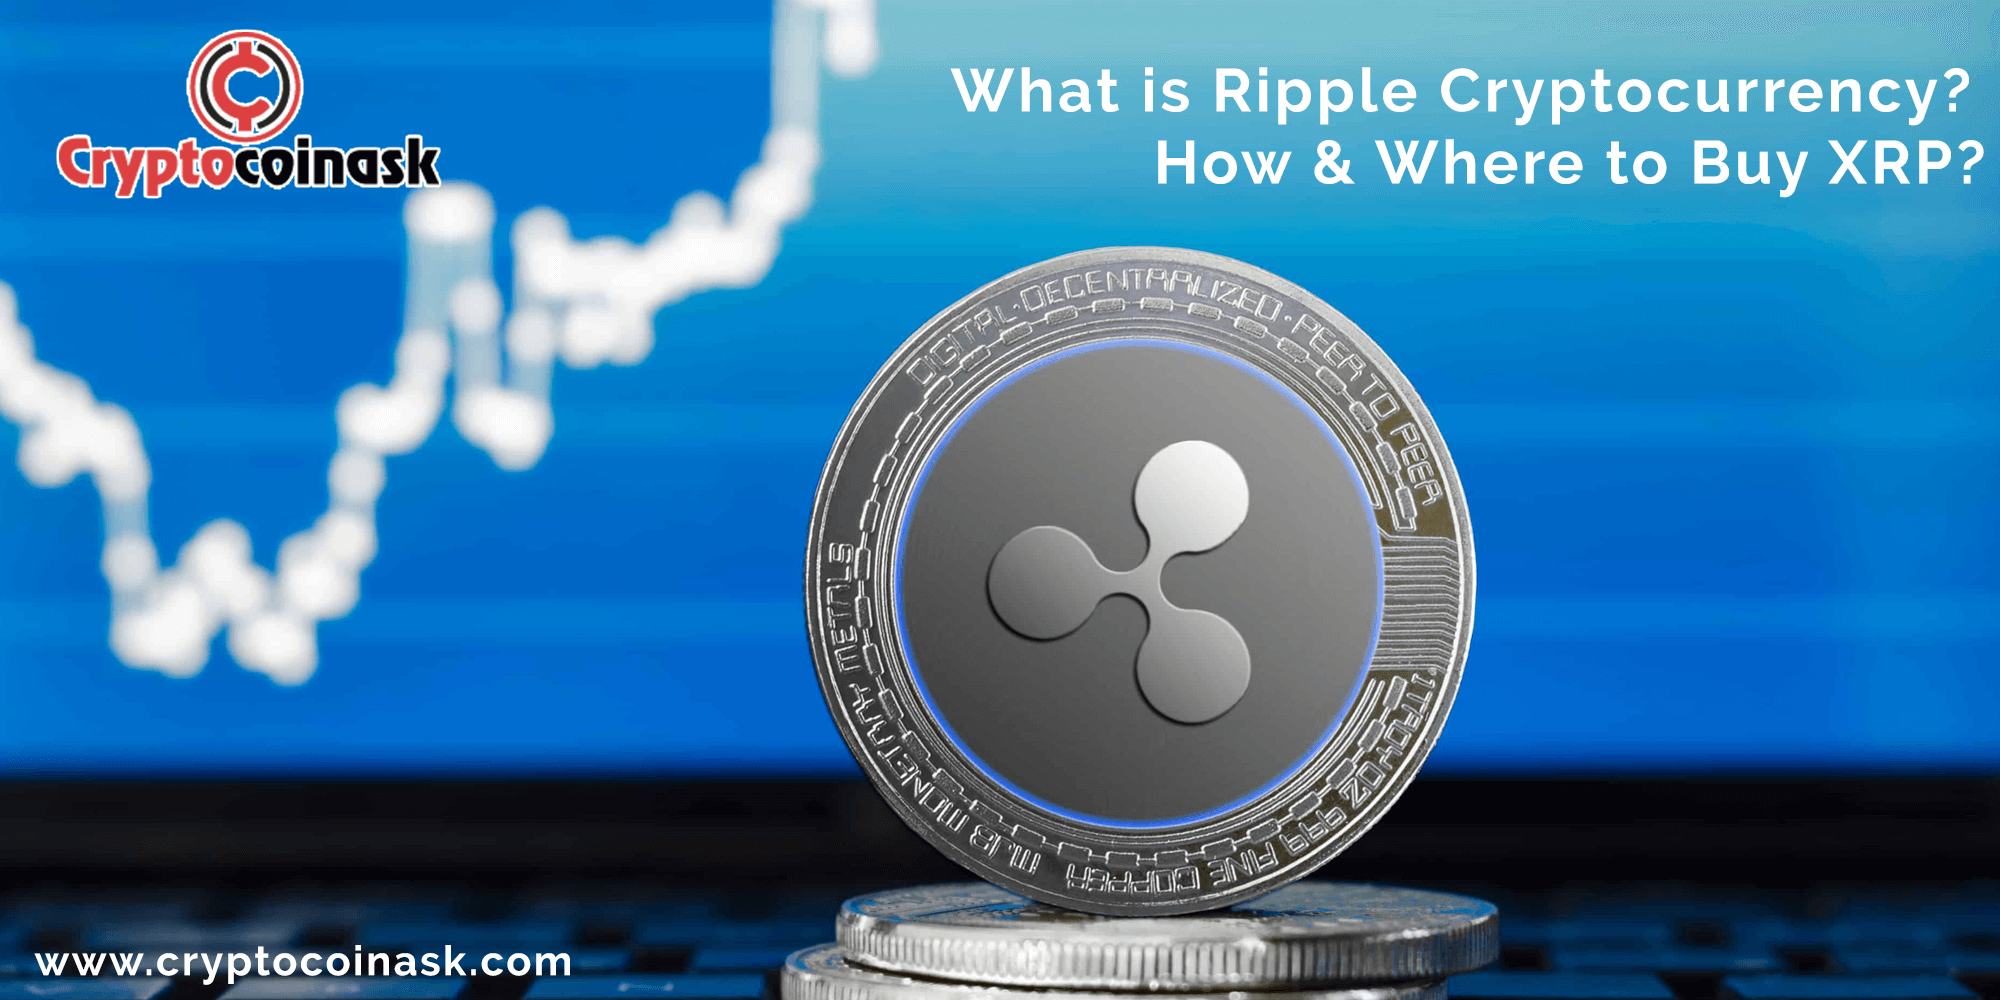 how to buy ripple cryptocurrency with ethereum